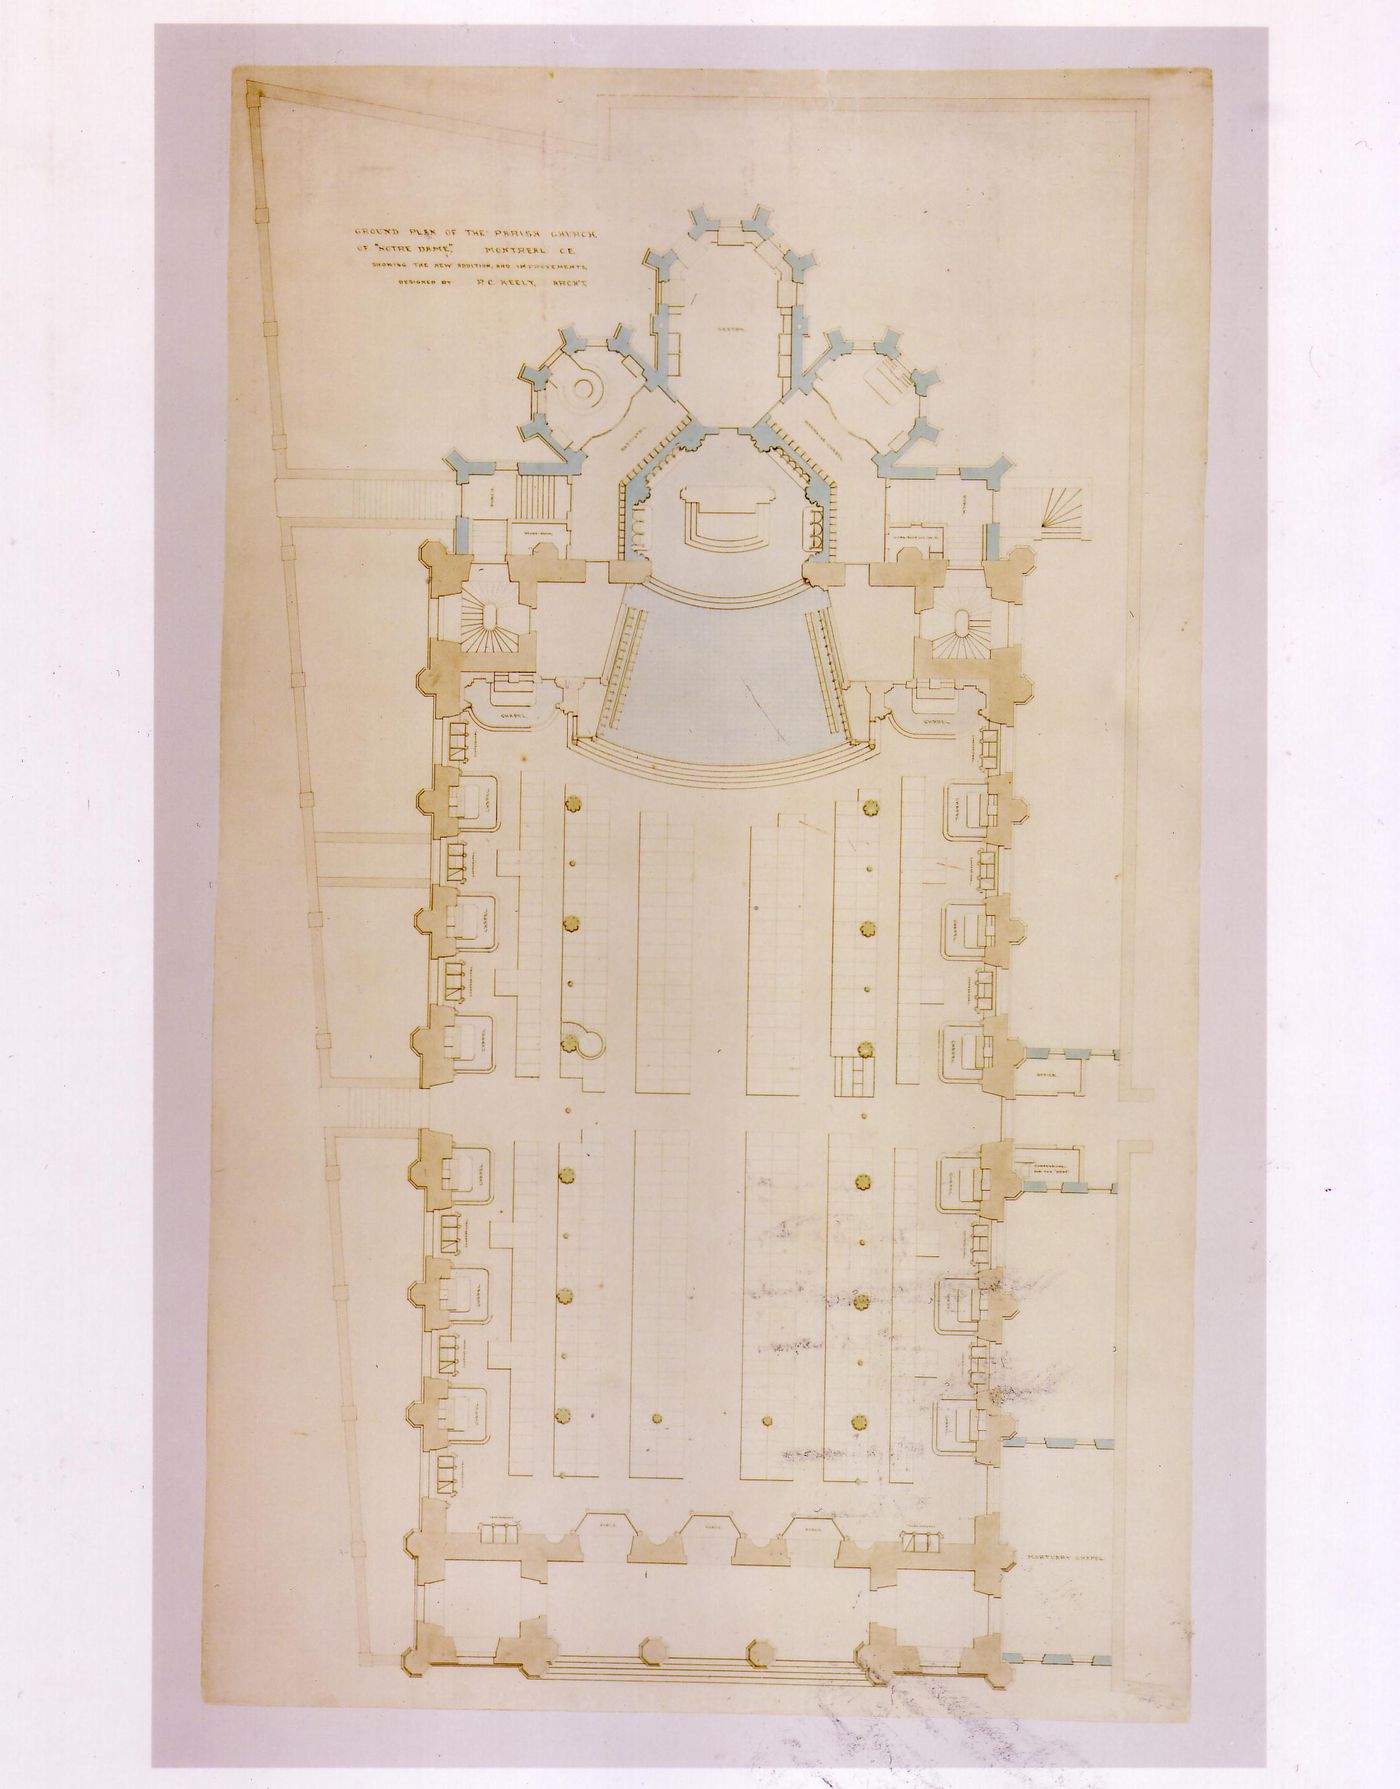 Ground floor plan for the interior design by Patrick Charles Keely for Notre-Dame de Montréal